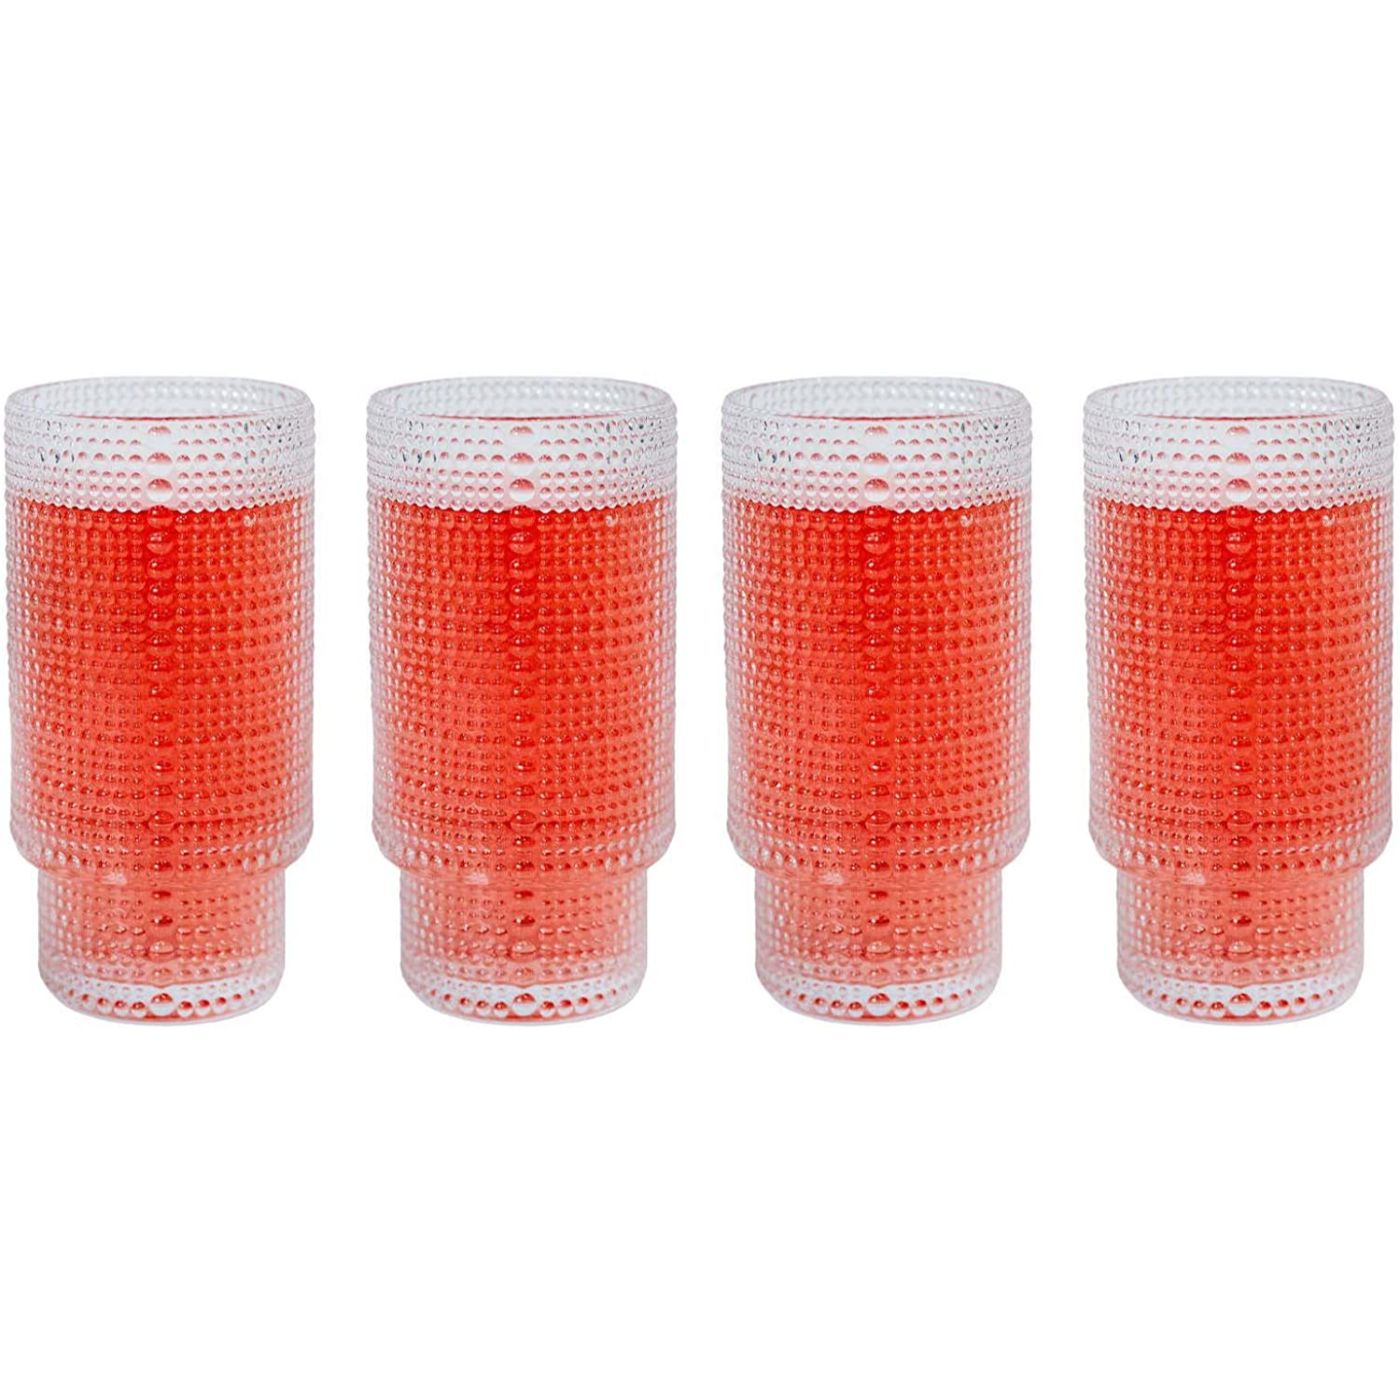 SoulTimes 16oz Hobnail Drinking Glasses Set of 4, Stackable Glass Cups With  Glass Straws, Aesthetic …See more SoulTimes 16oz Hobnail Drinking Glasses